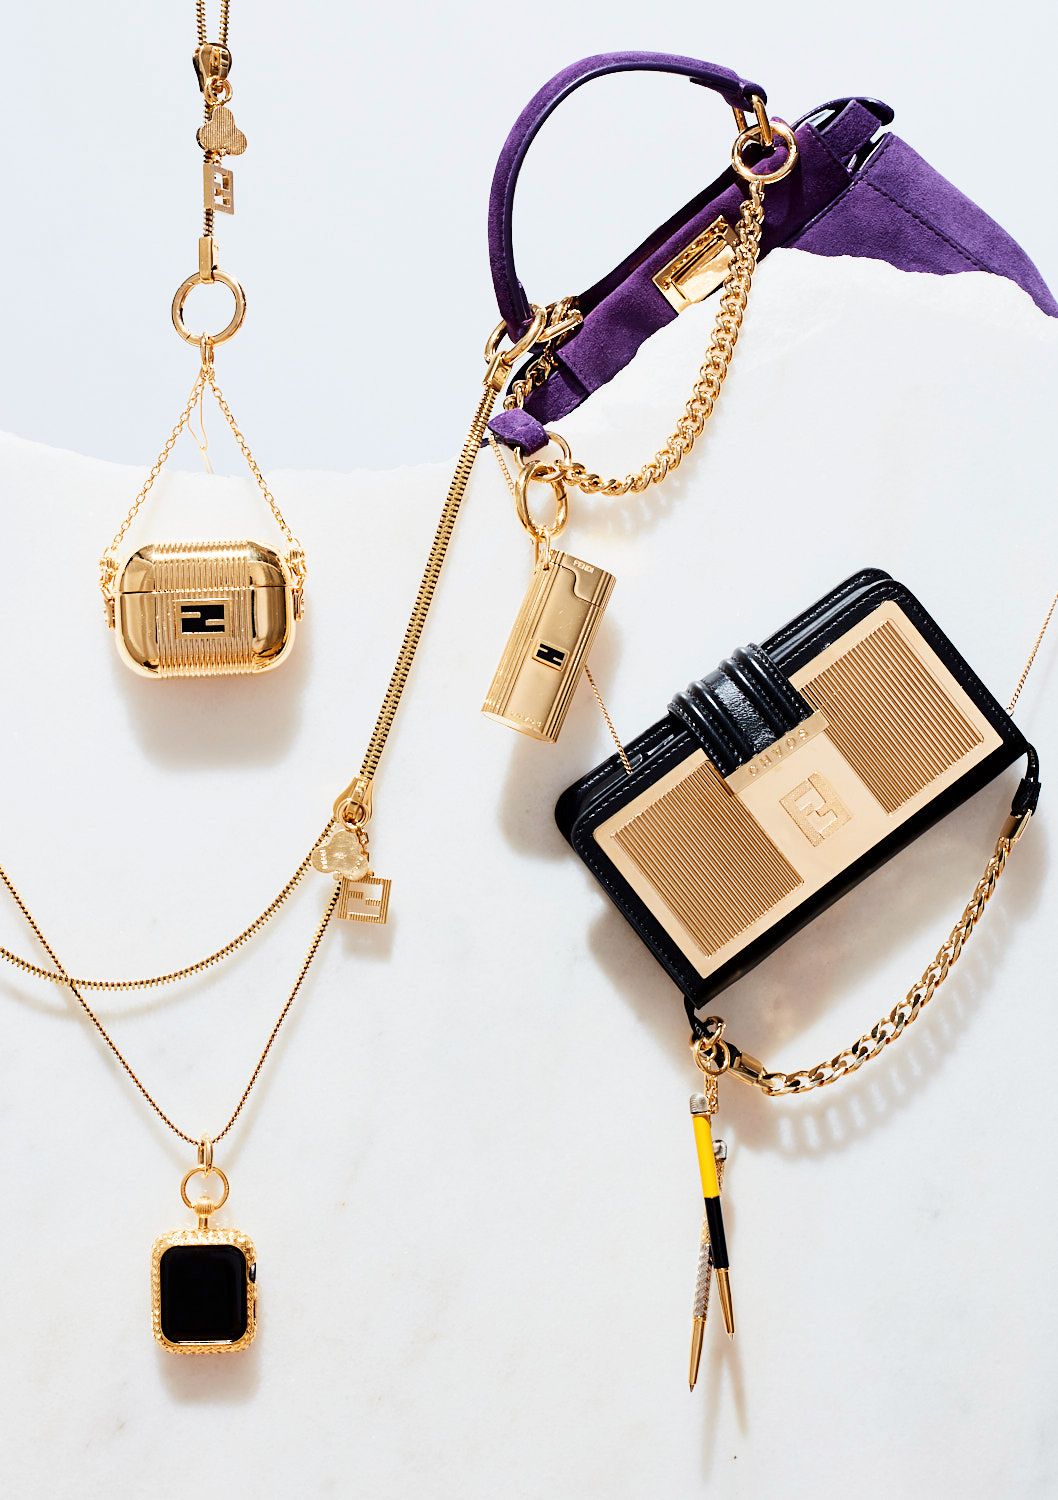 Fendi Recruits British Label Chaos to Make Your Smart Gadgets Look 